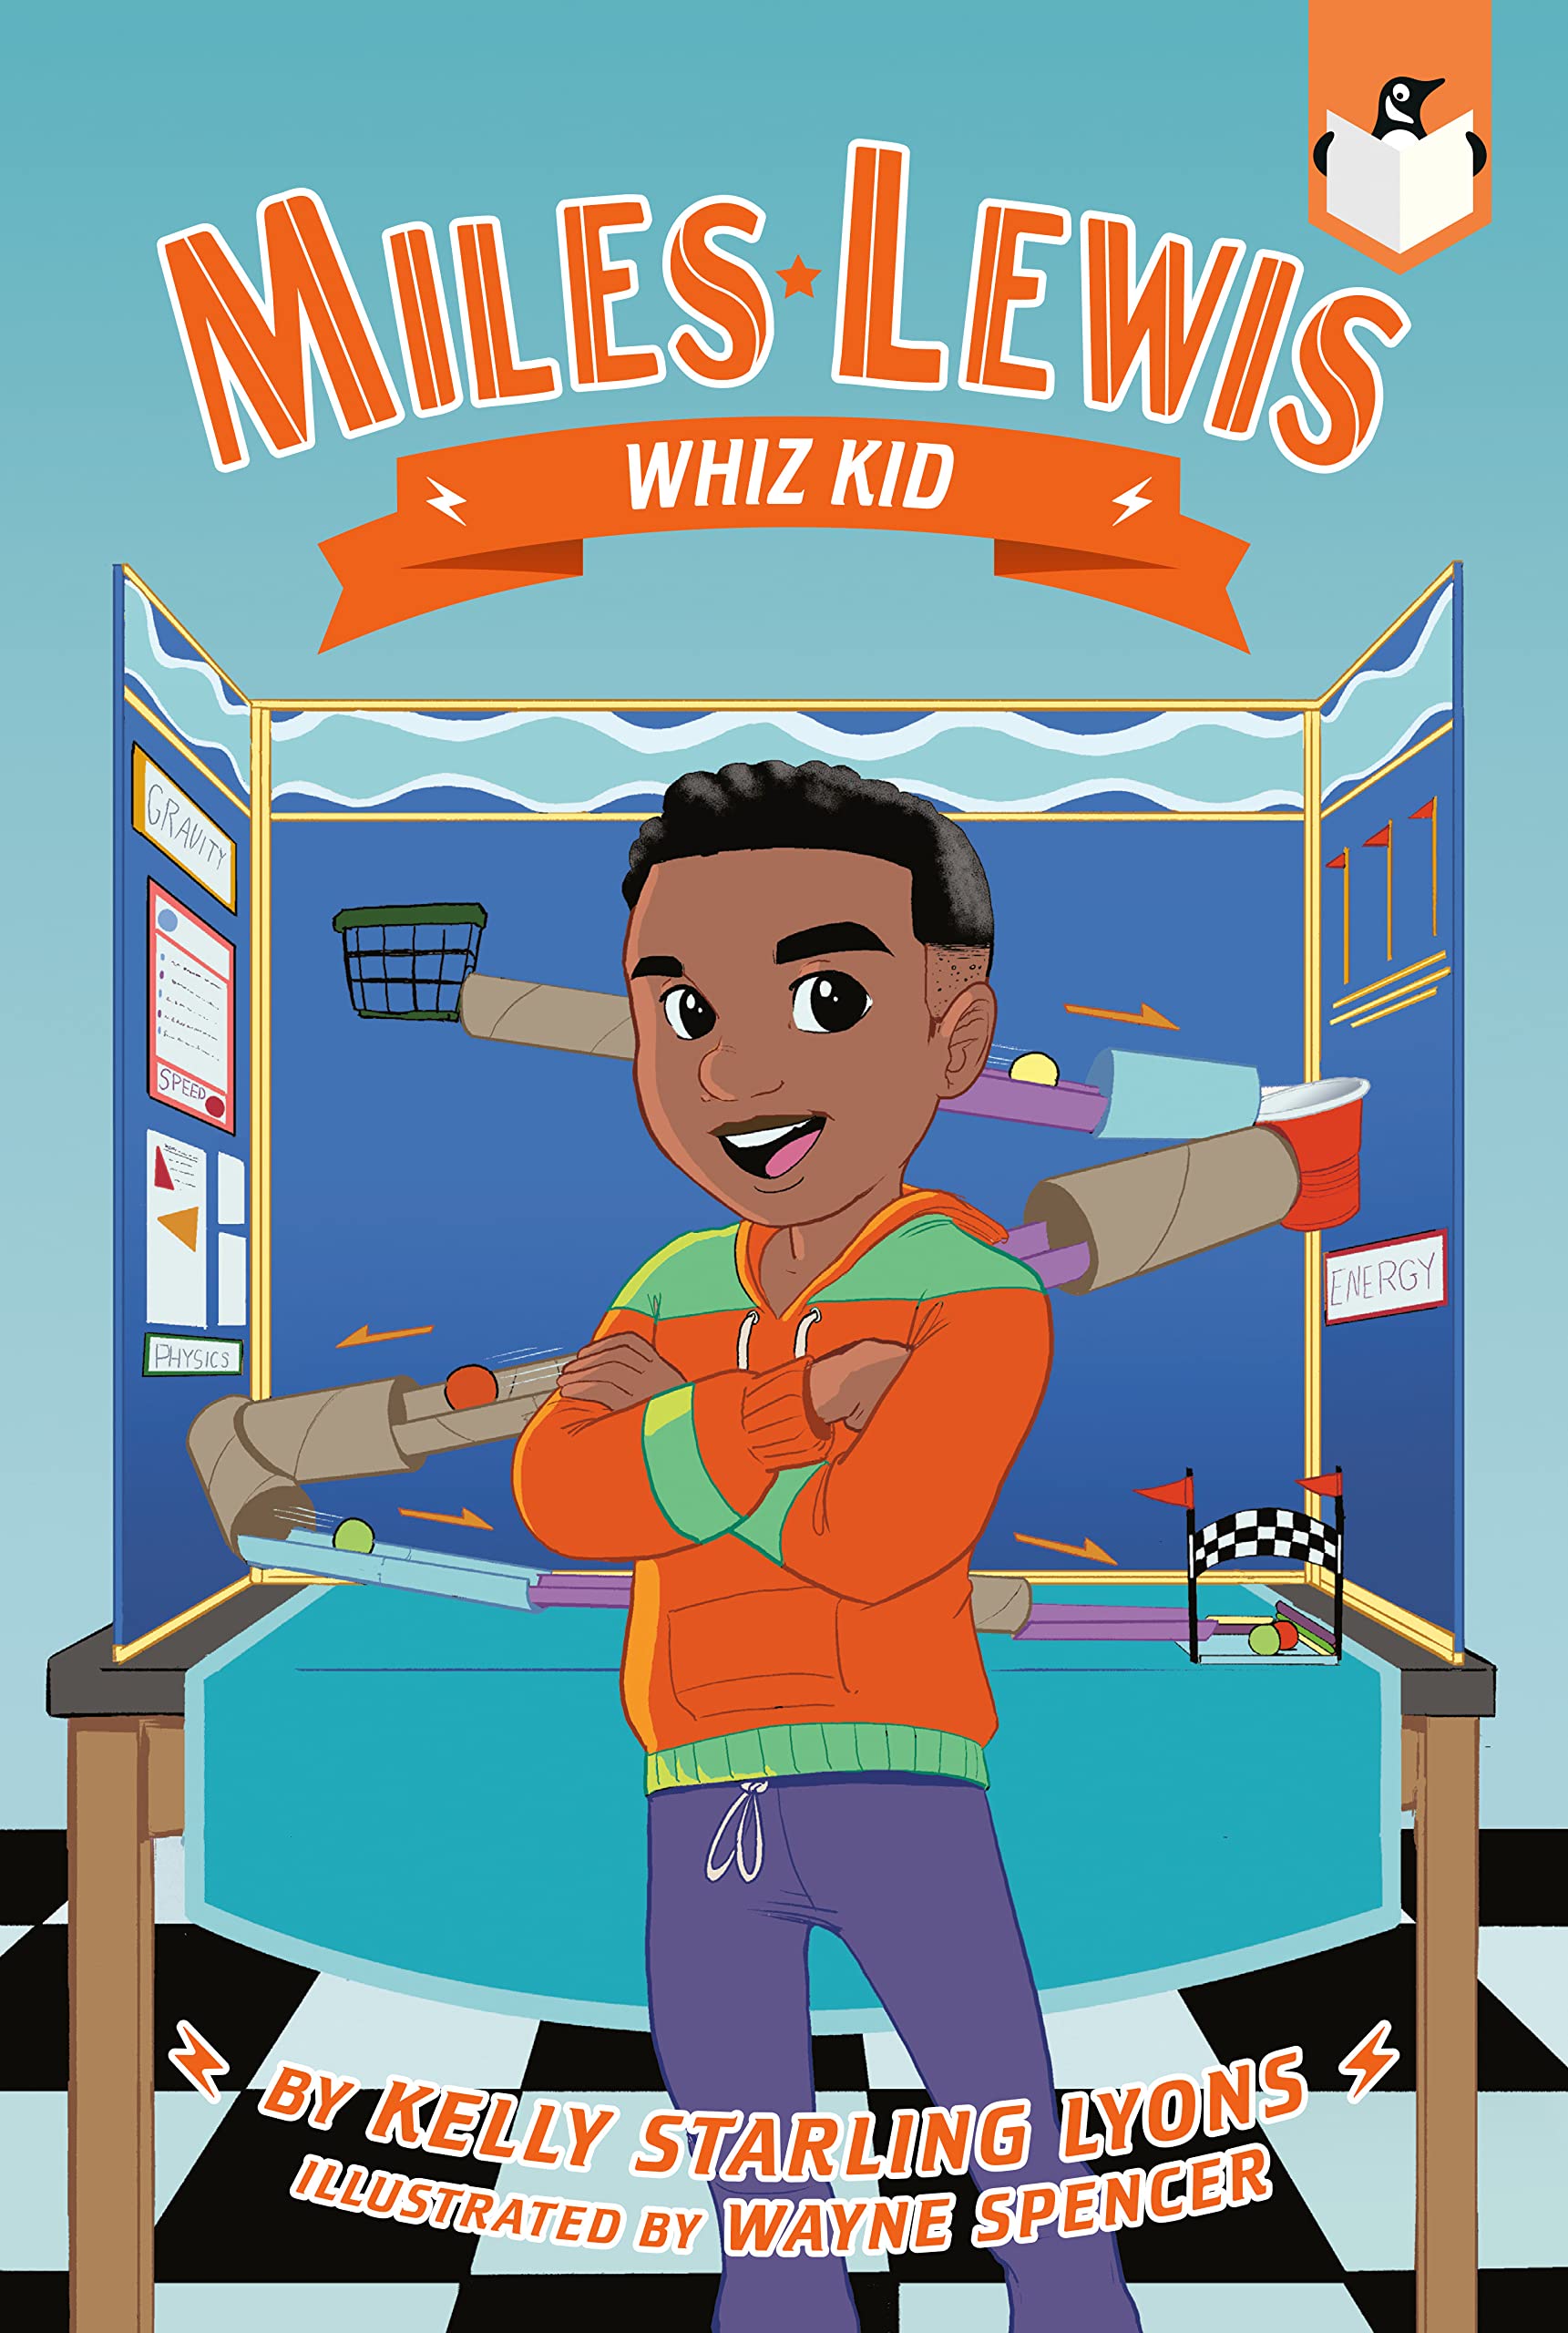 Book Cover Miles Lewis: Whiz Kid by Kelly Starling Lyons